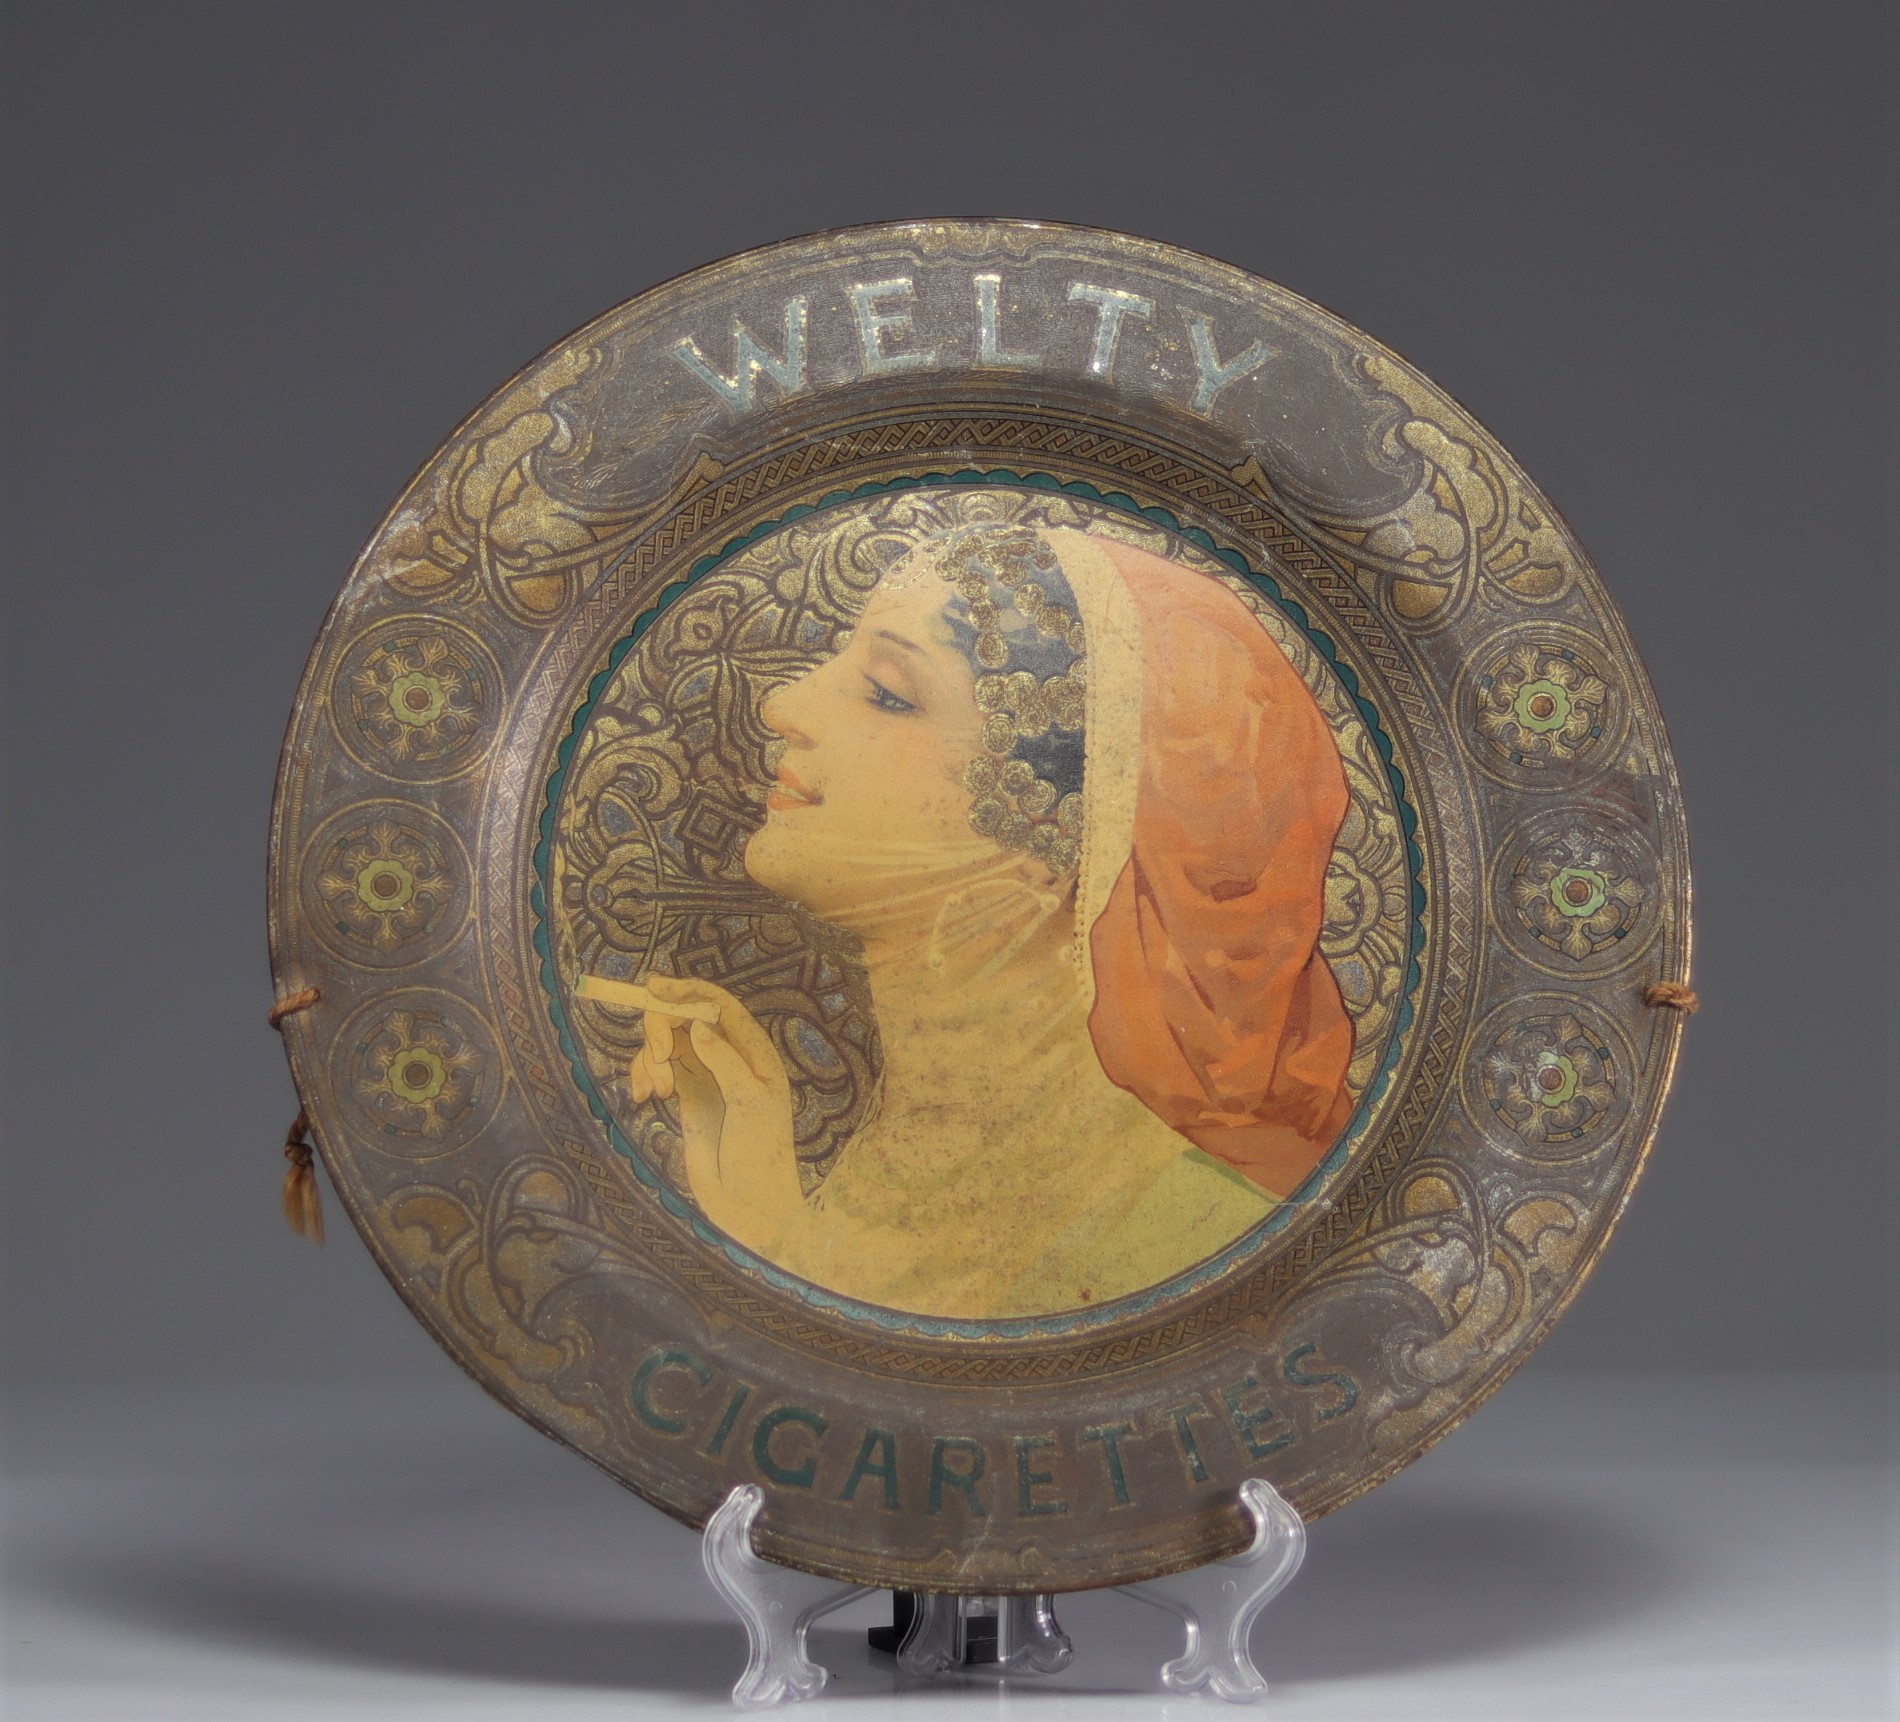 Advertising tray for Welty Cigarettes around 1900.